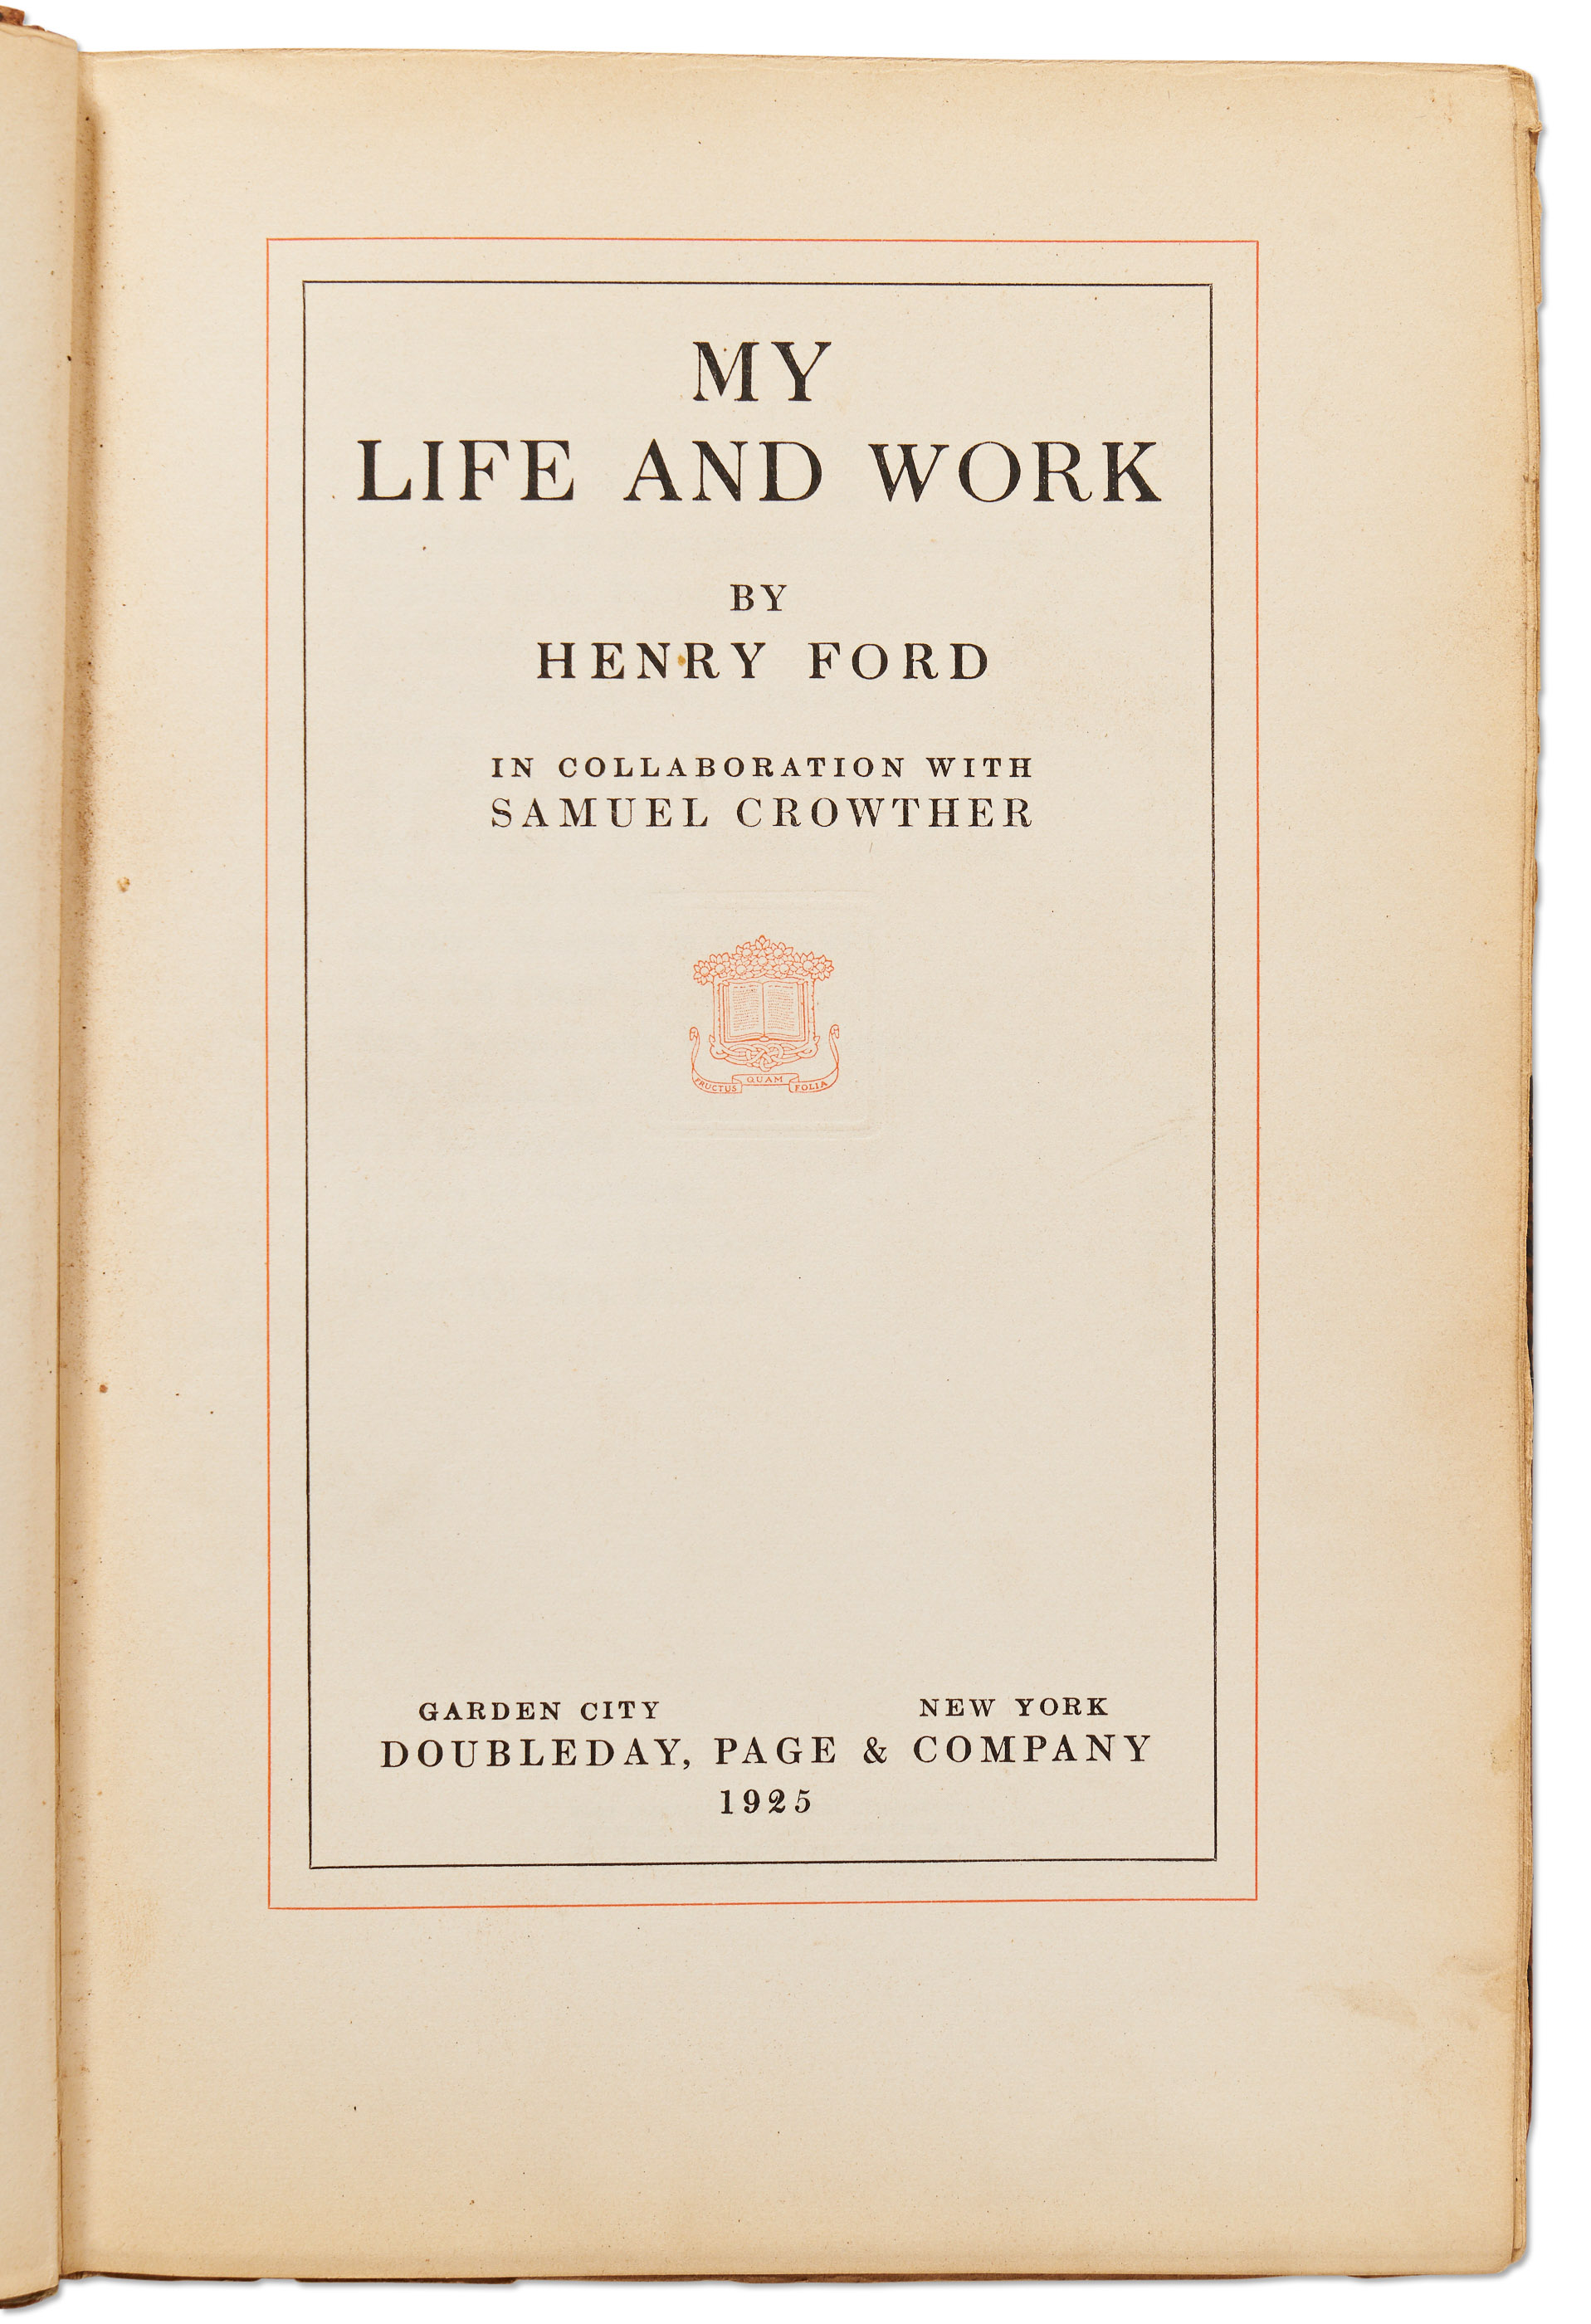 autobiography henry ford